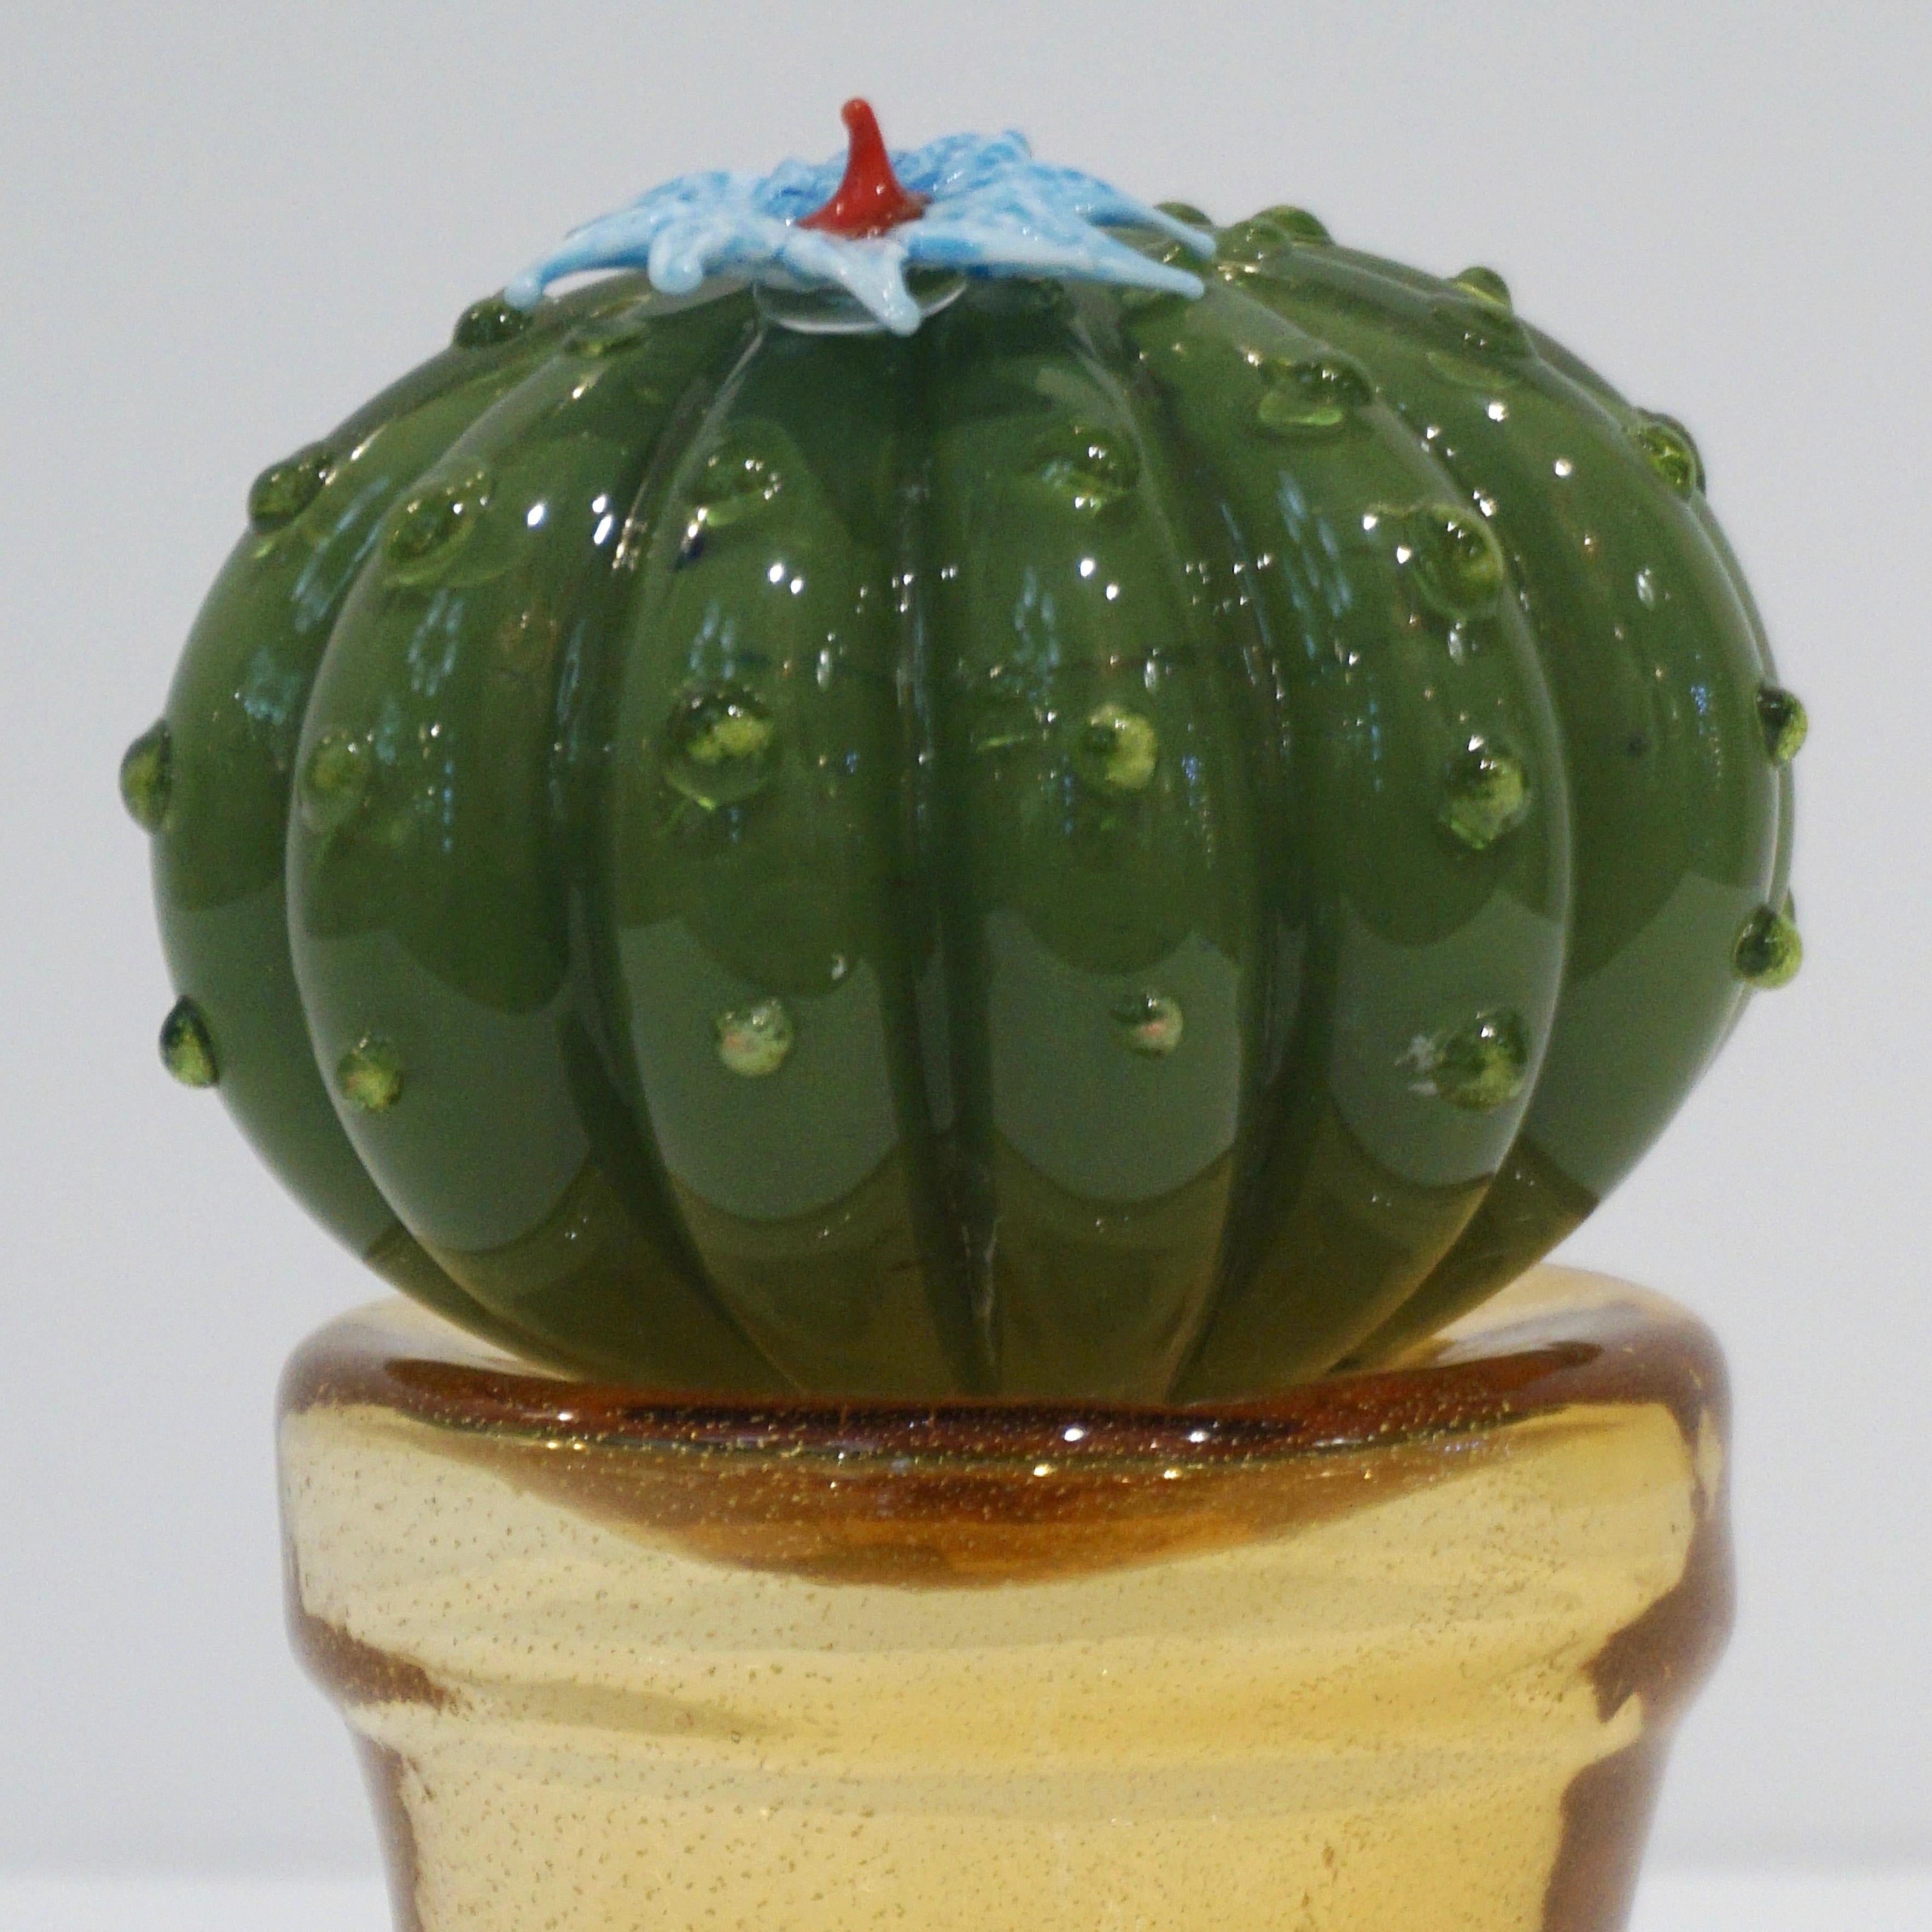 1990s Vintage Italian Green Murano Glass Small Cactus Plant with Blue Flower 2